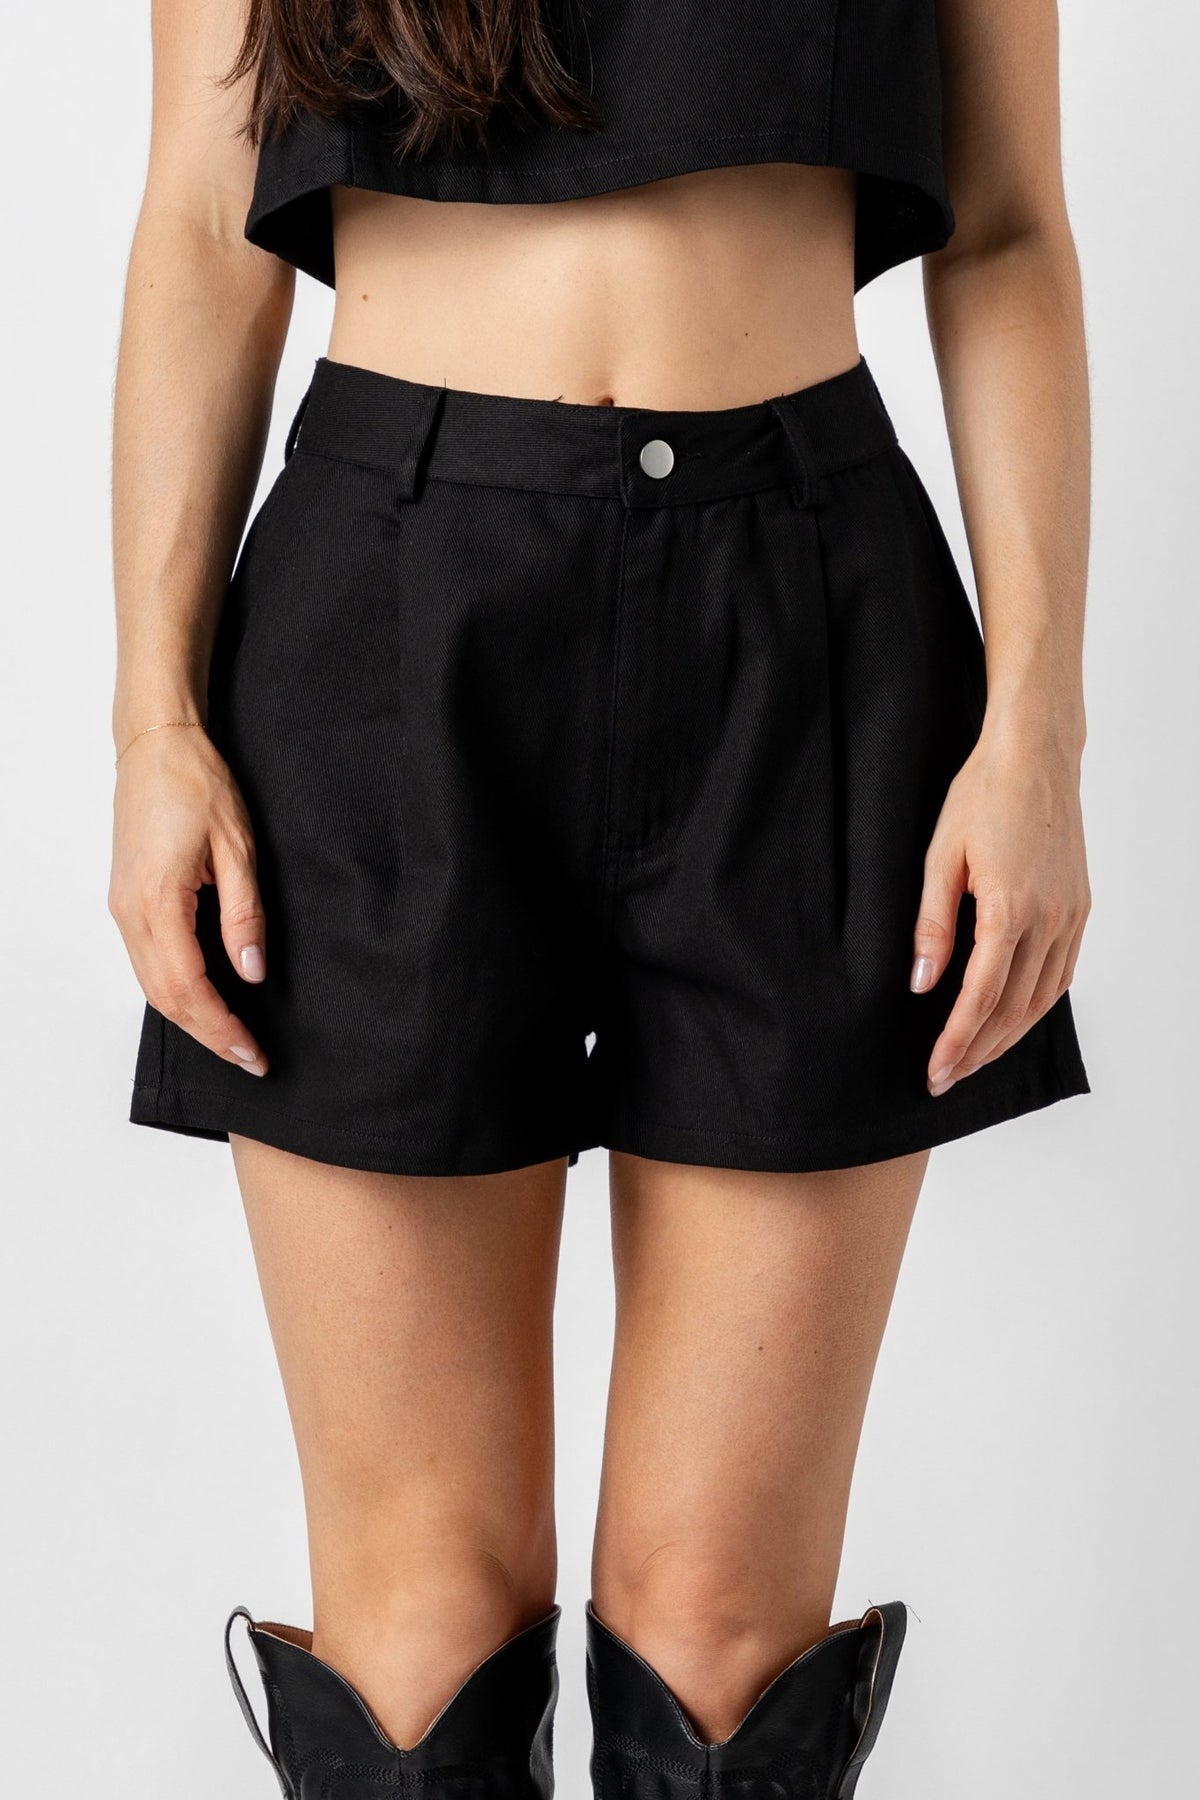 Pleated shorts black - Cute Shorts - Trendy Shorts at Lush Fashion Lounge Boutique in Oklahoma City